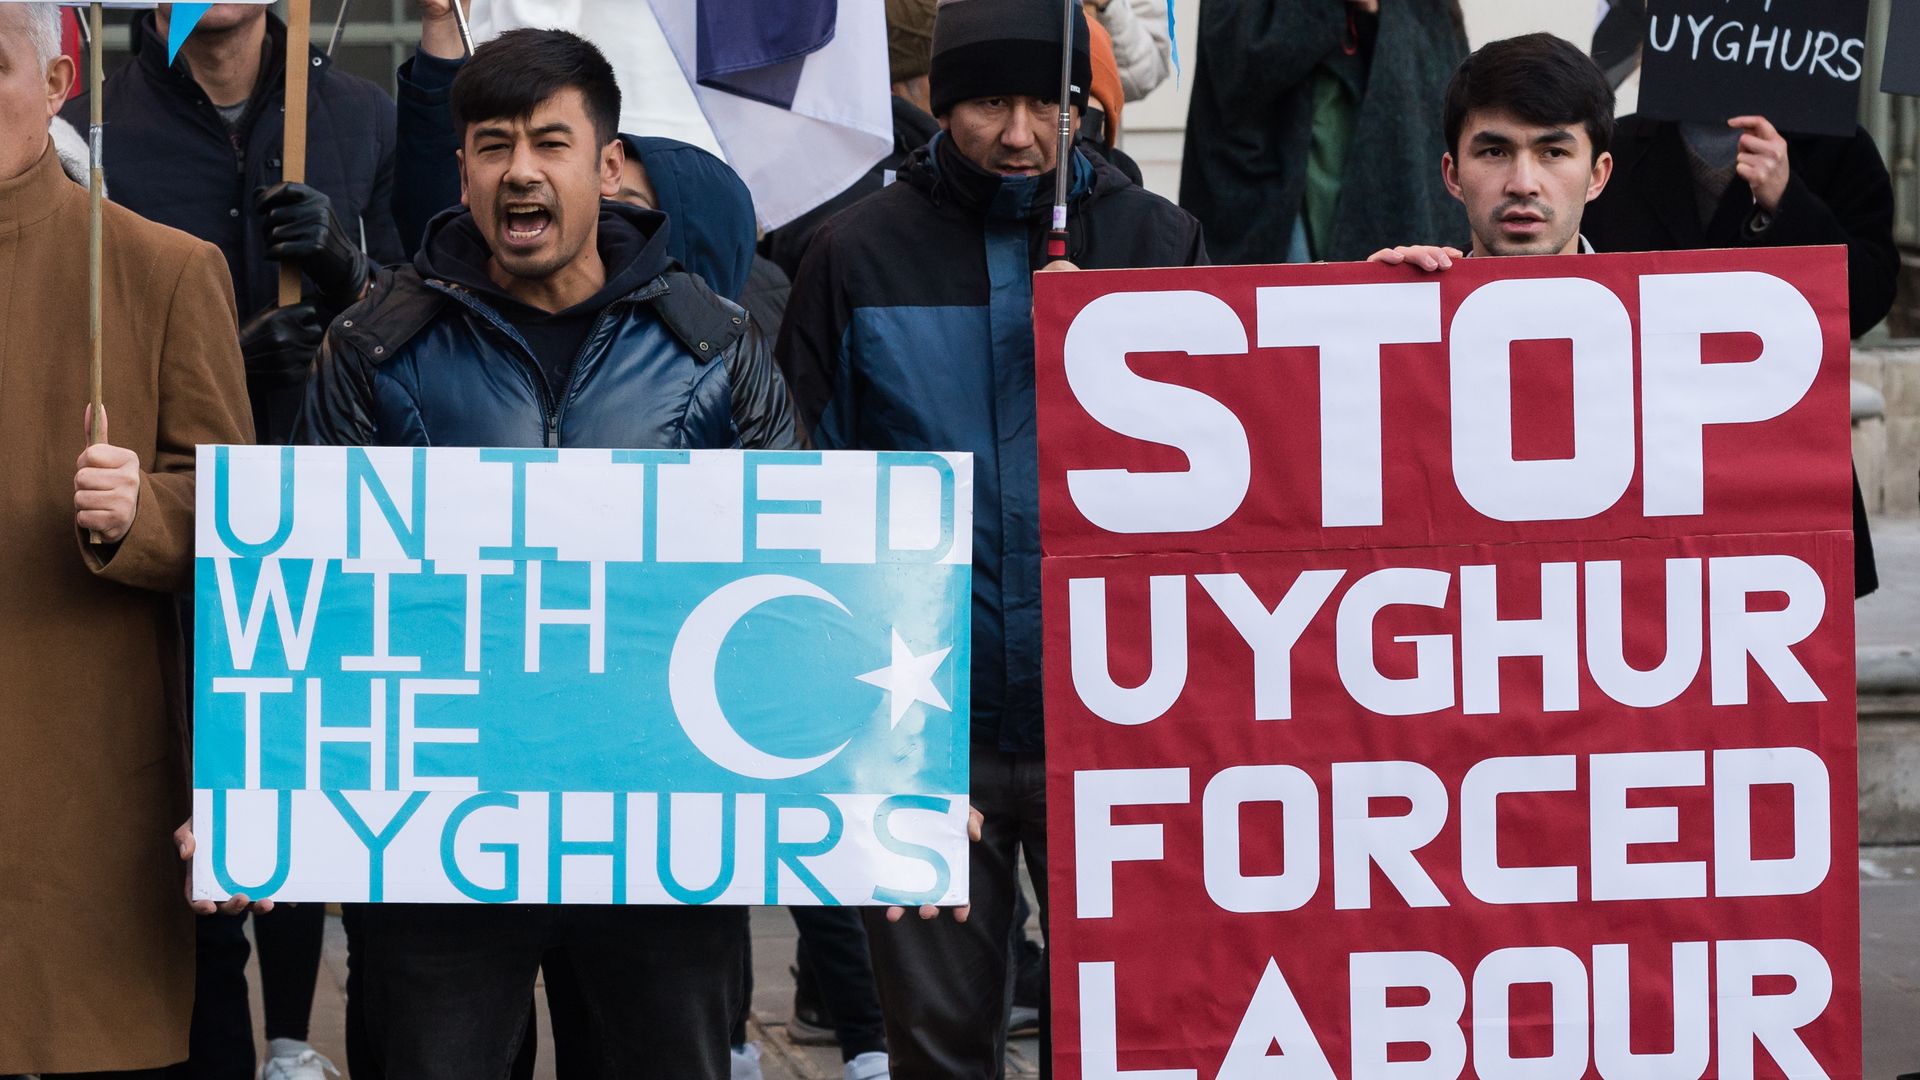 Uyghurs rallied outside the Chinese Embassy on Human Rights Day in London last December. Photo: Wiktor Szymanowicz/Anadolu Agency via Getty Images